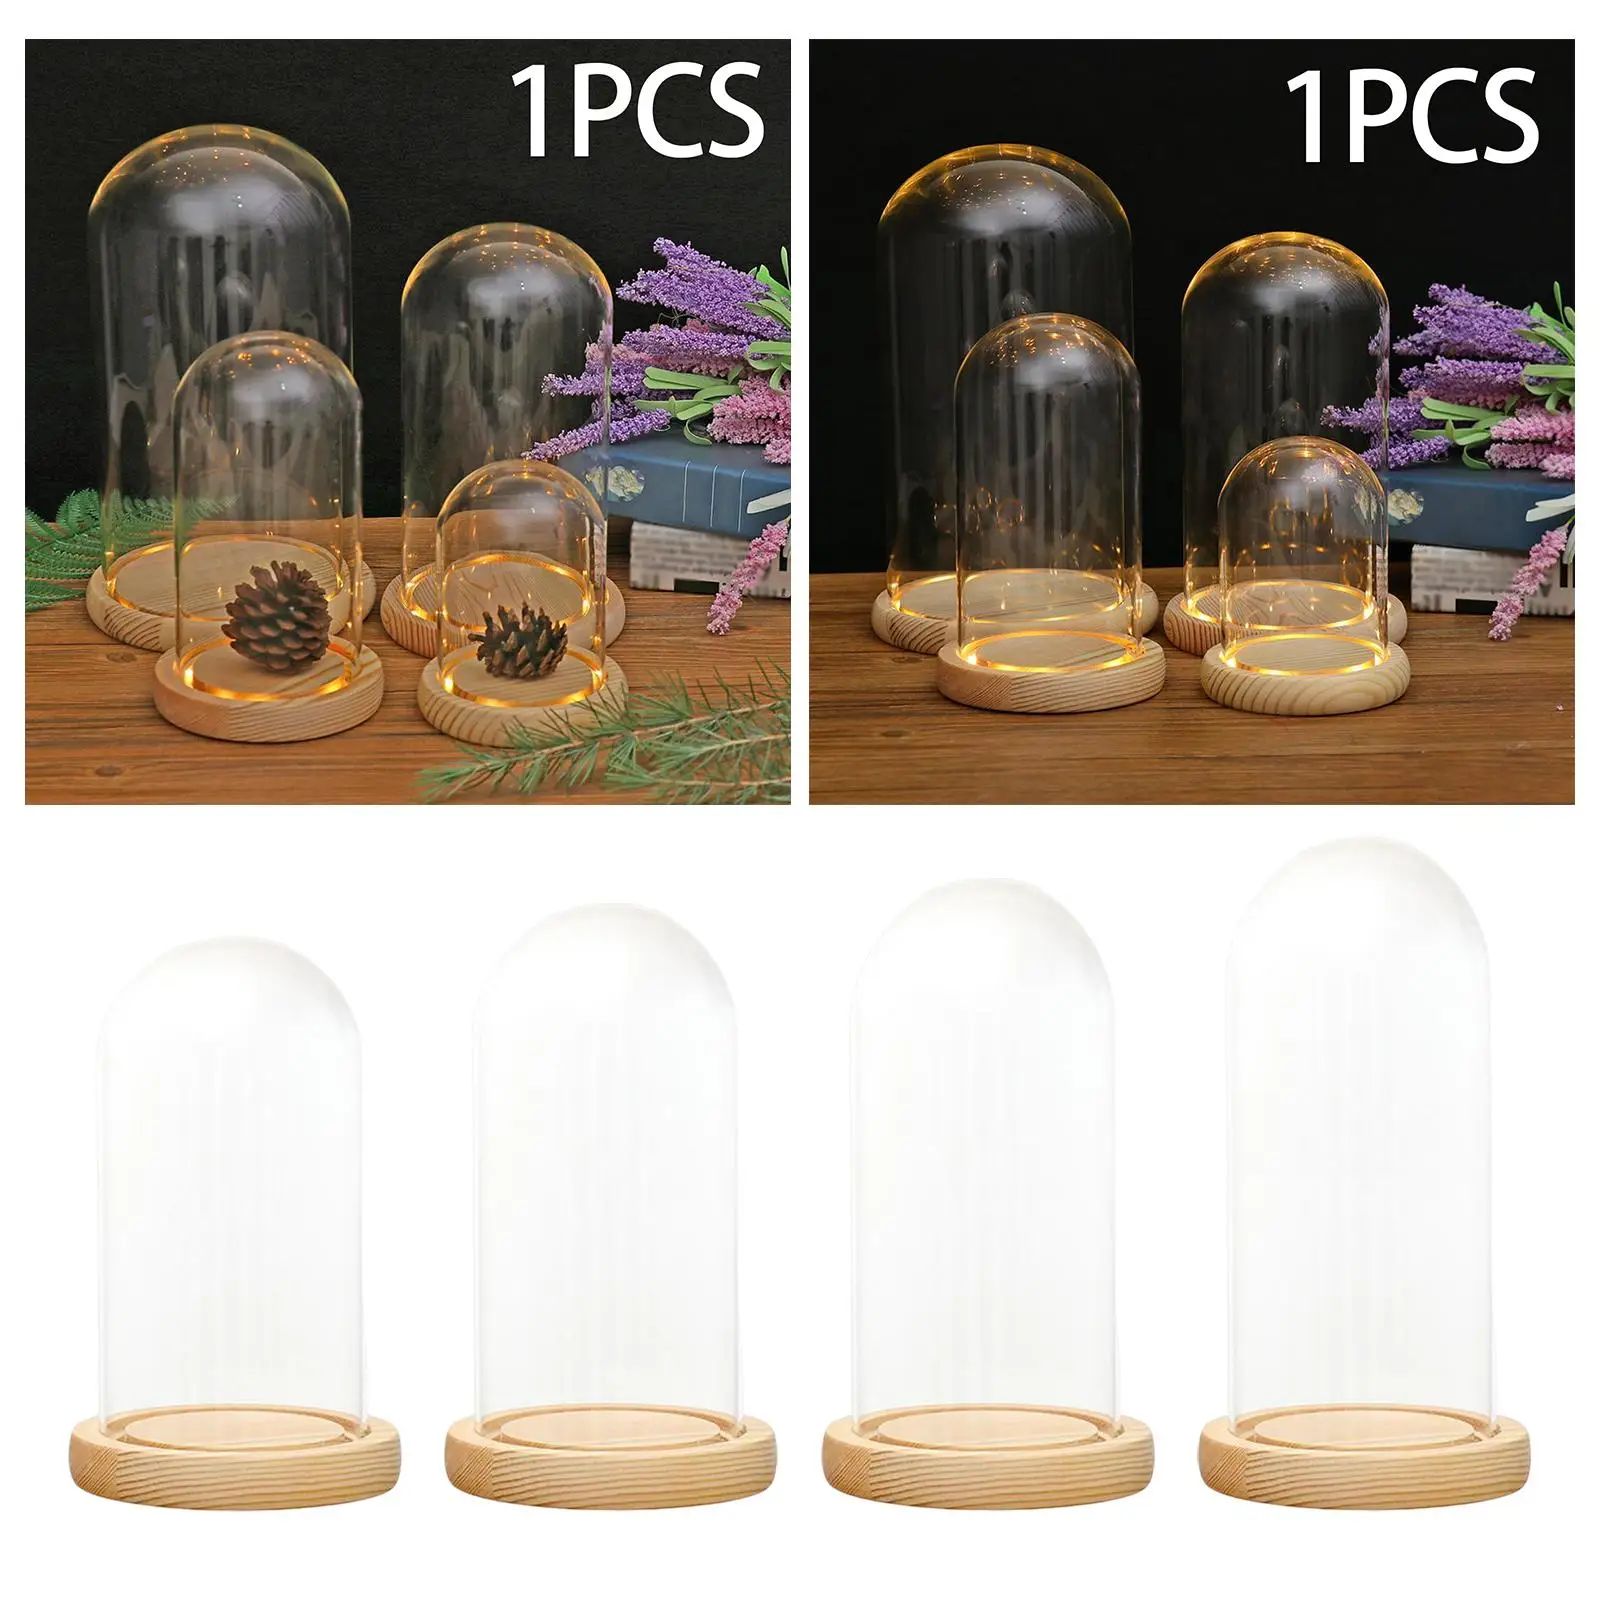 Clear Glass Dome Cloche Decorative Micro Landscape Holder with Base Display Jar Case for Antique Collectibles Showcase Wedding